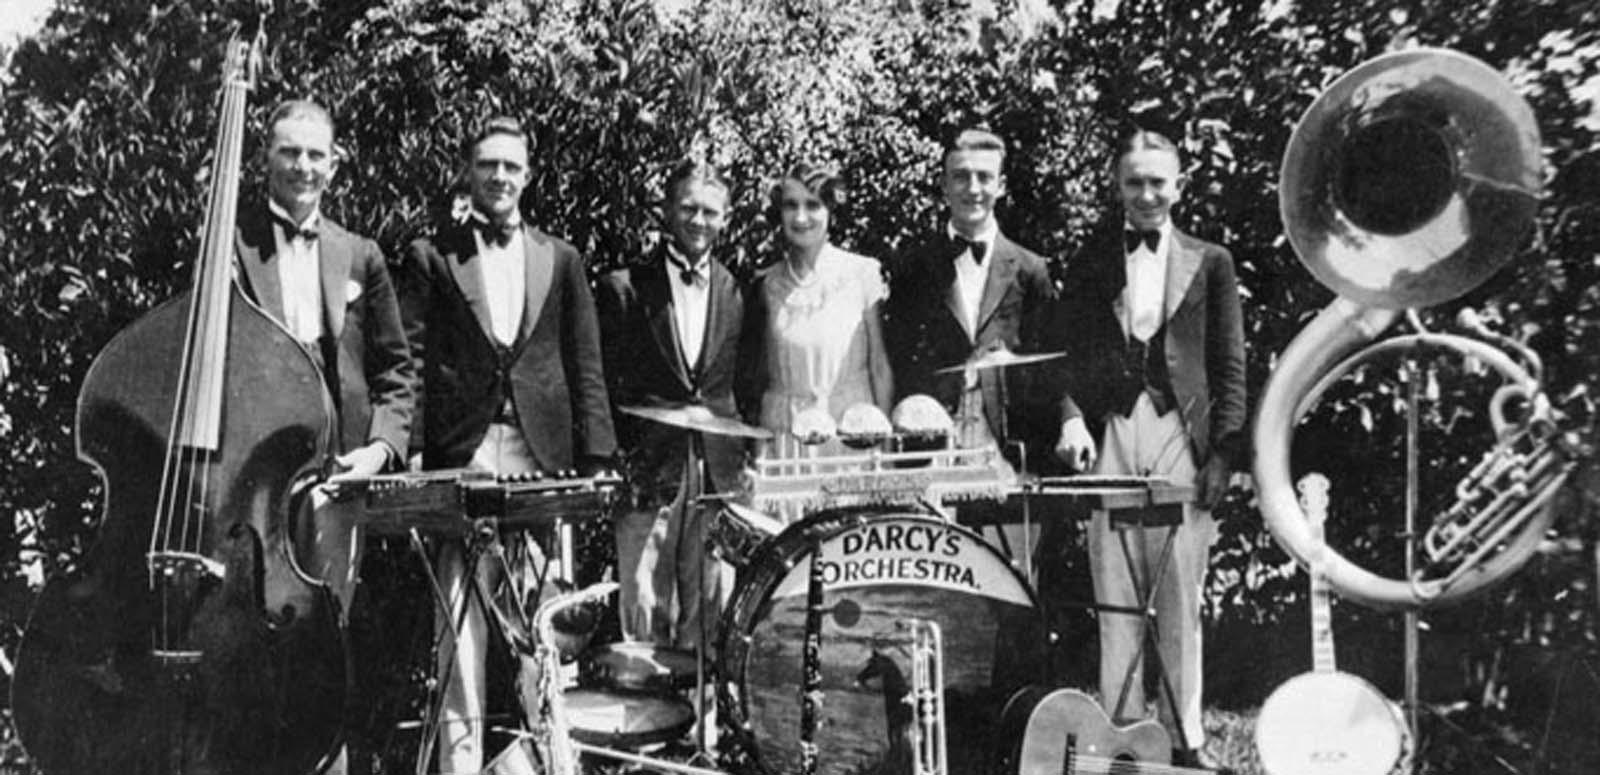 The six members of jazz dance band Doreen D’Arcy’s Orchestra pose with their instruments in 1931